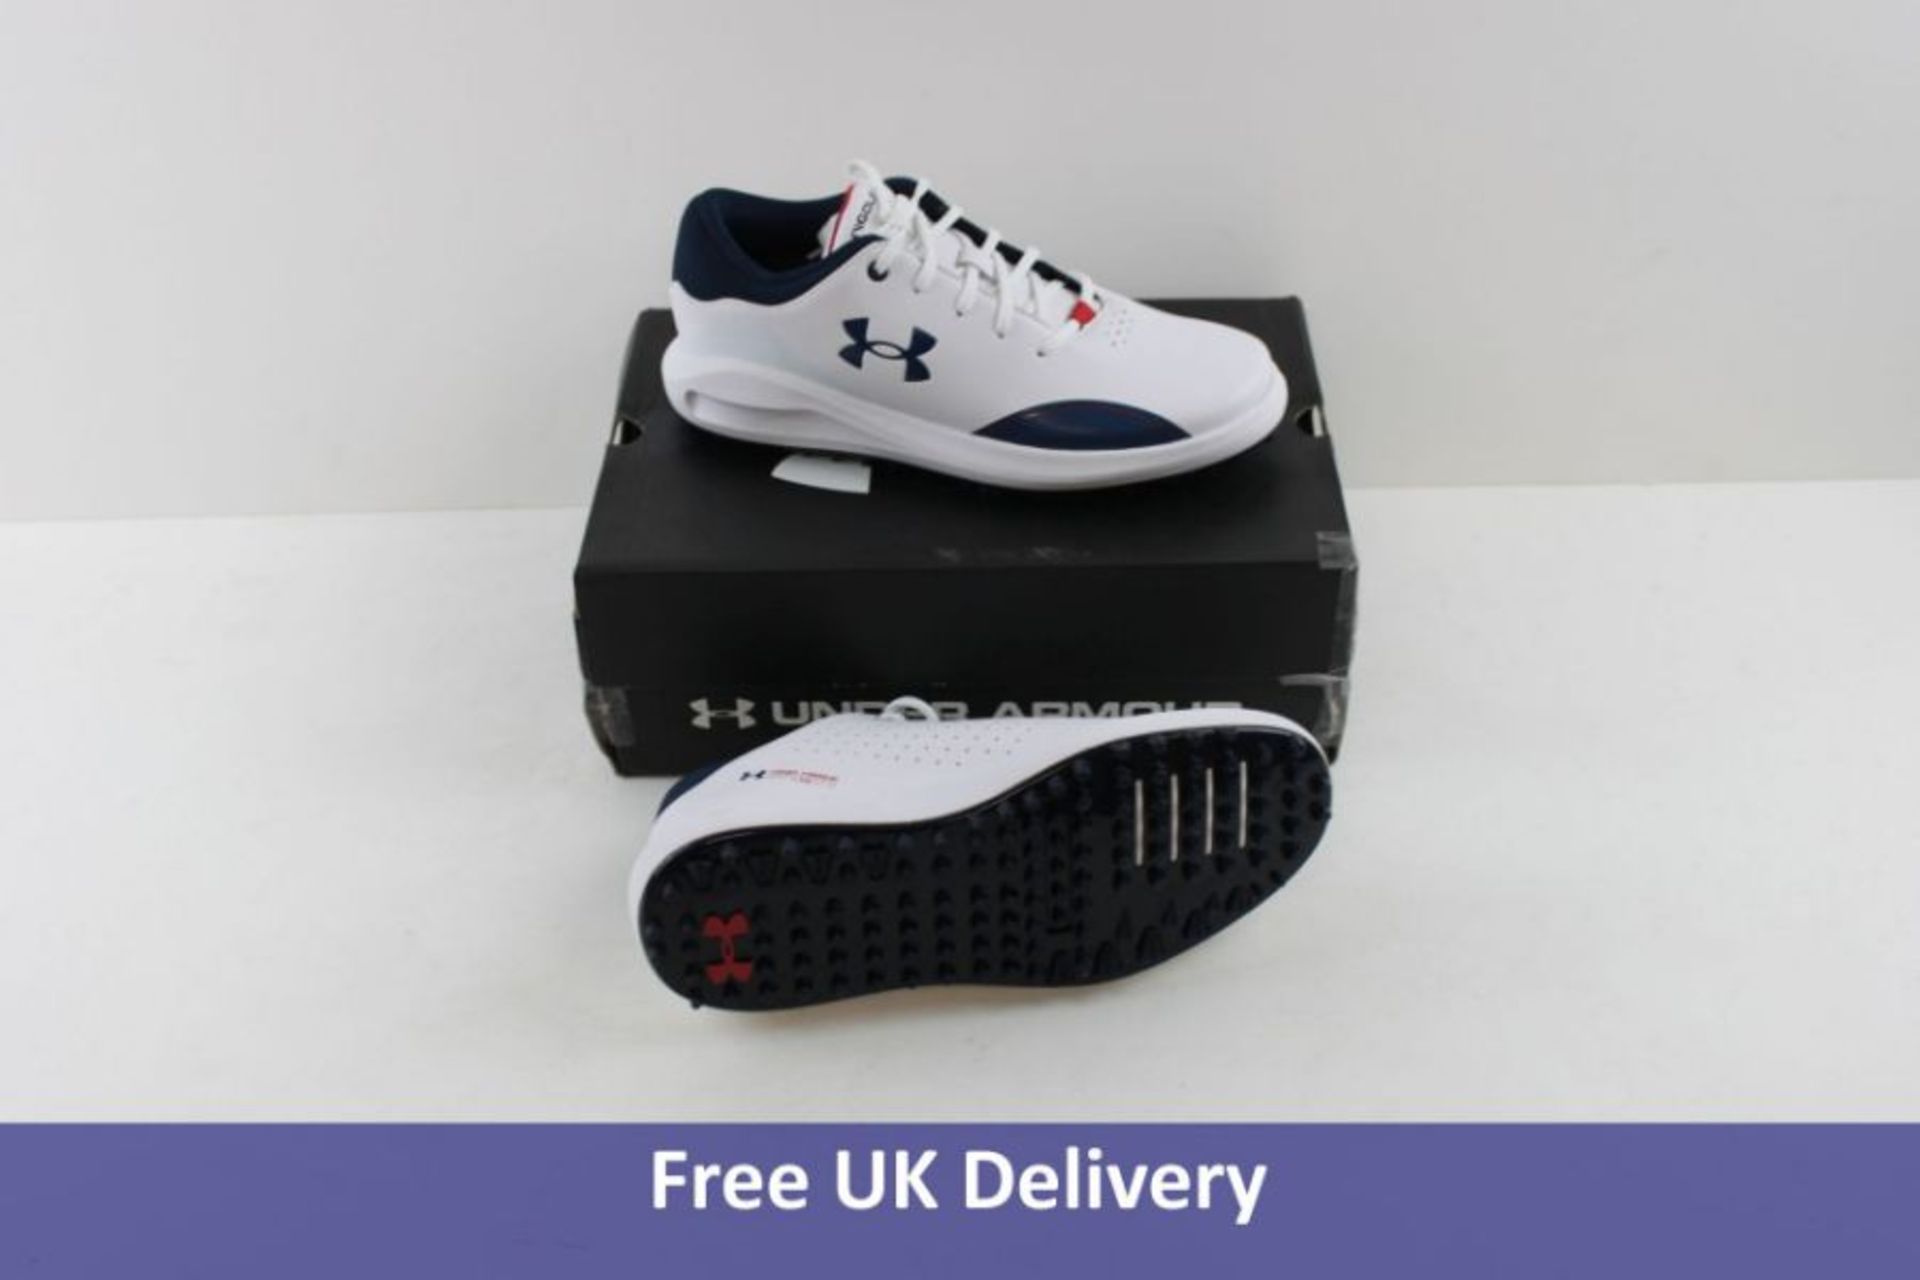 Under Armour Draw Sport SL Junior Golf Shoes, White, Blue and Red, UK 4.5. Box Damaged